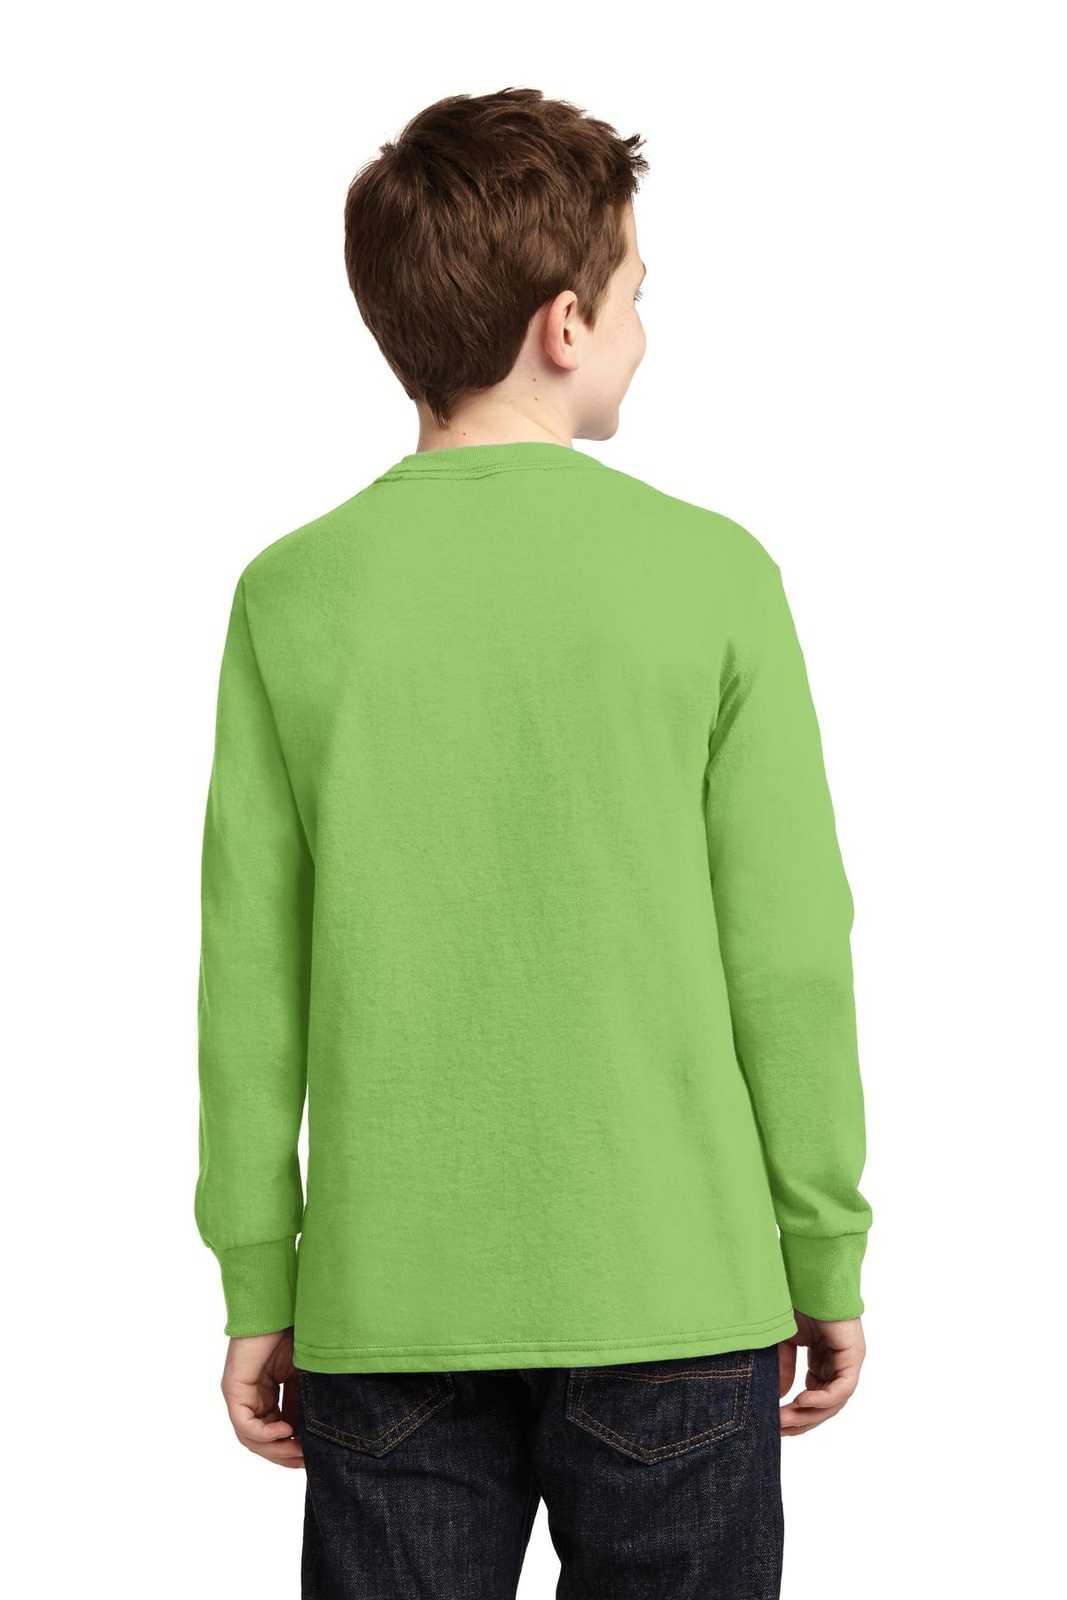 Port & Company PC54YLS Youth Long Sleeve Core Cotton Tee - Lime - HIT a Double - 1